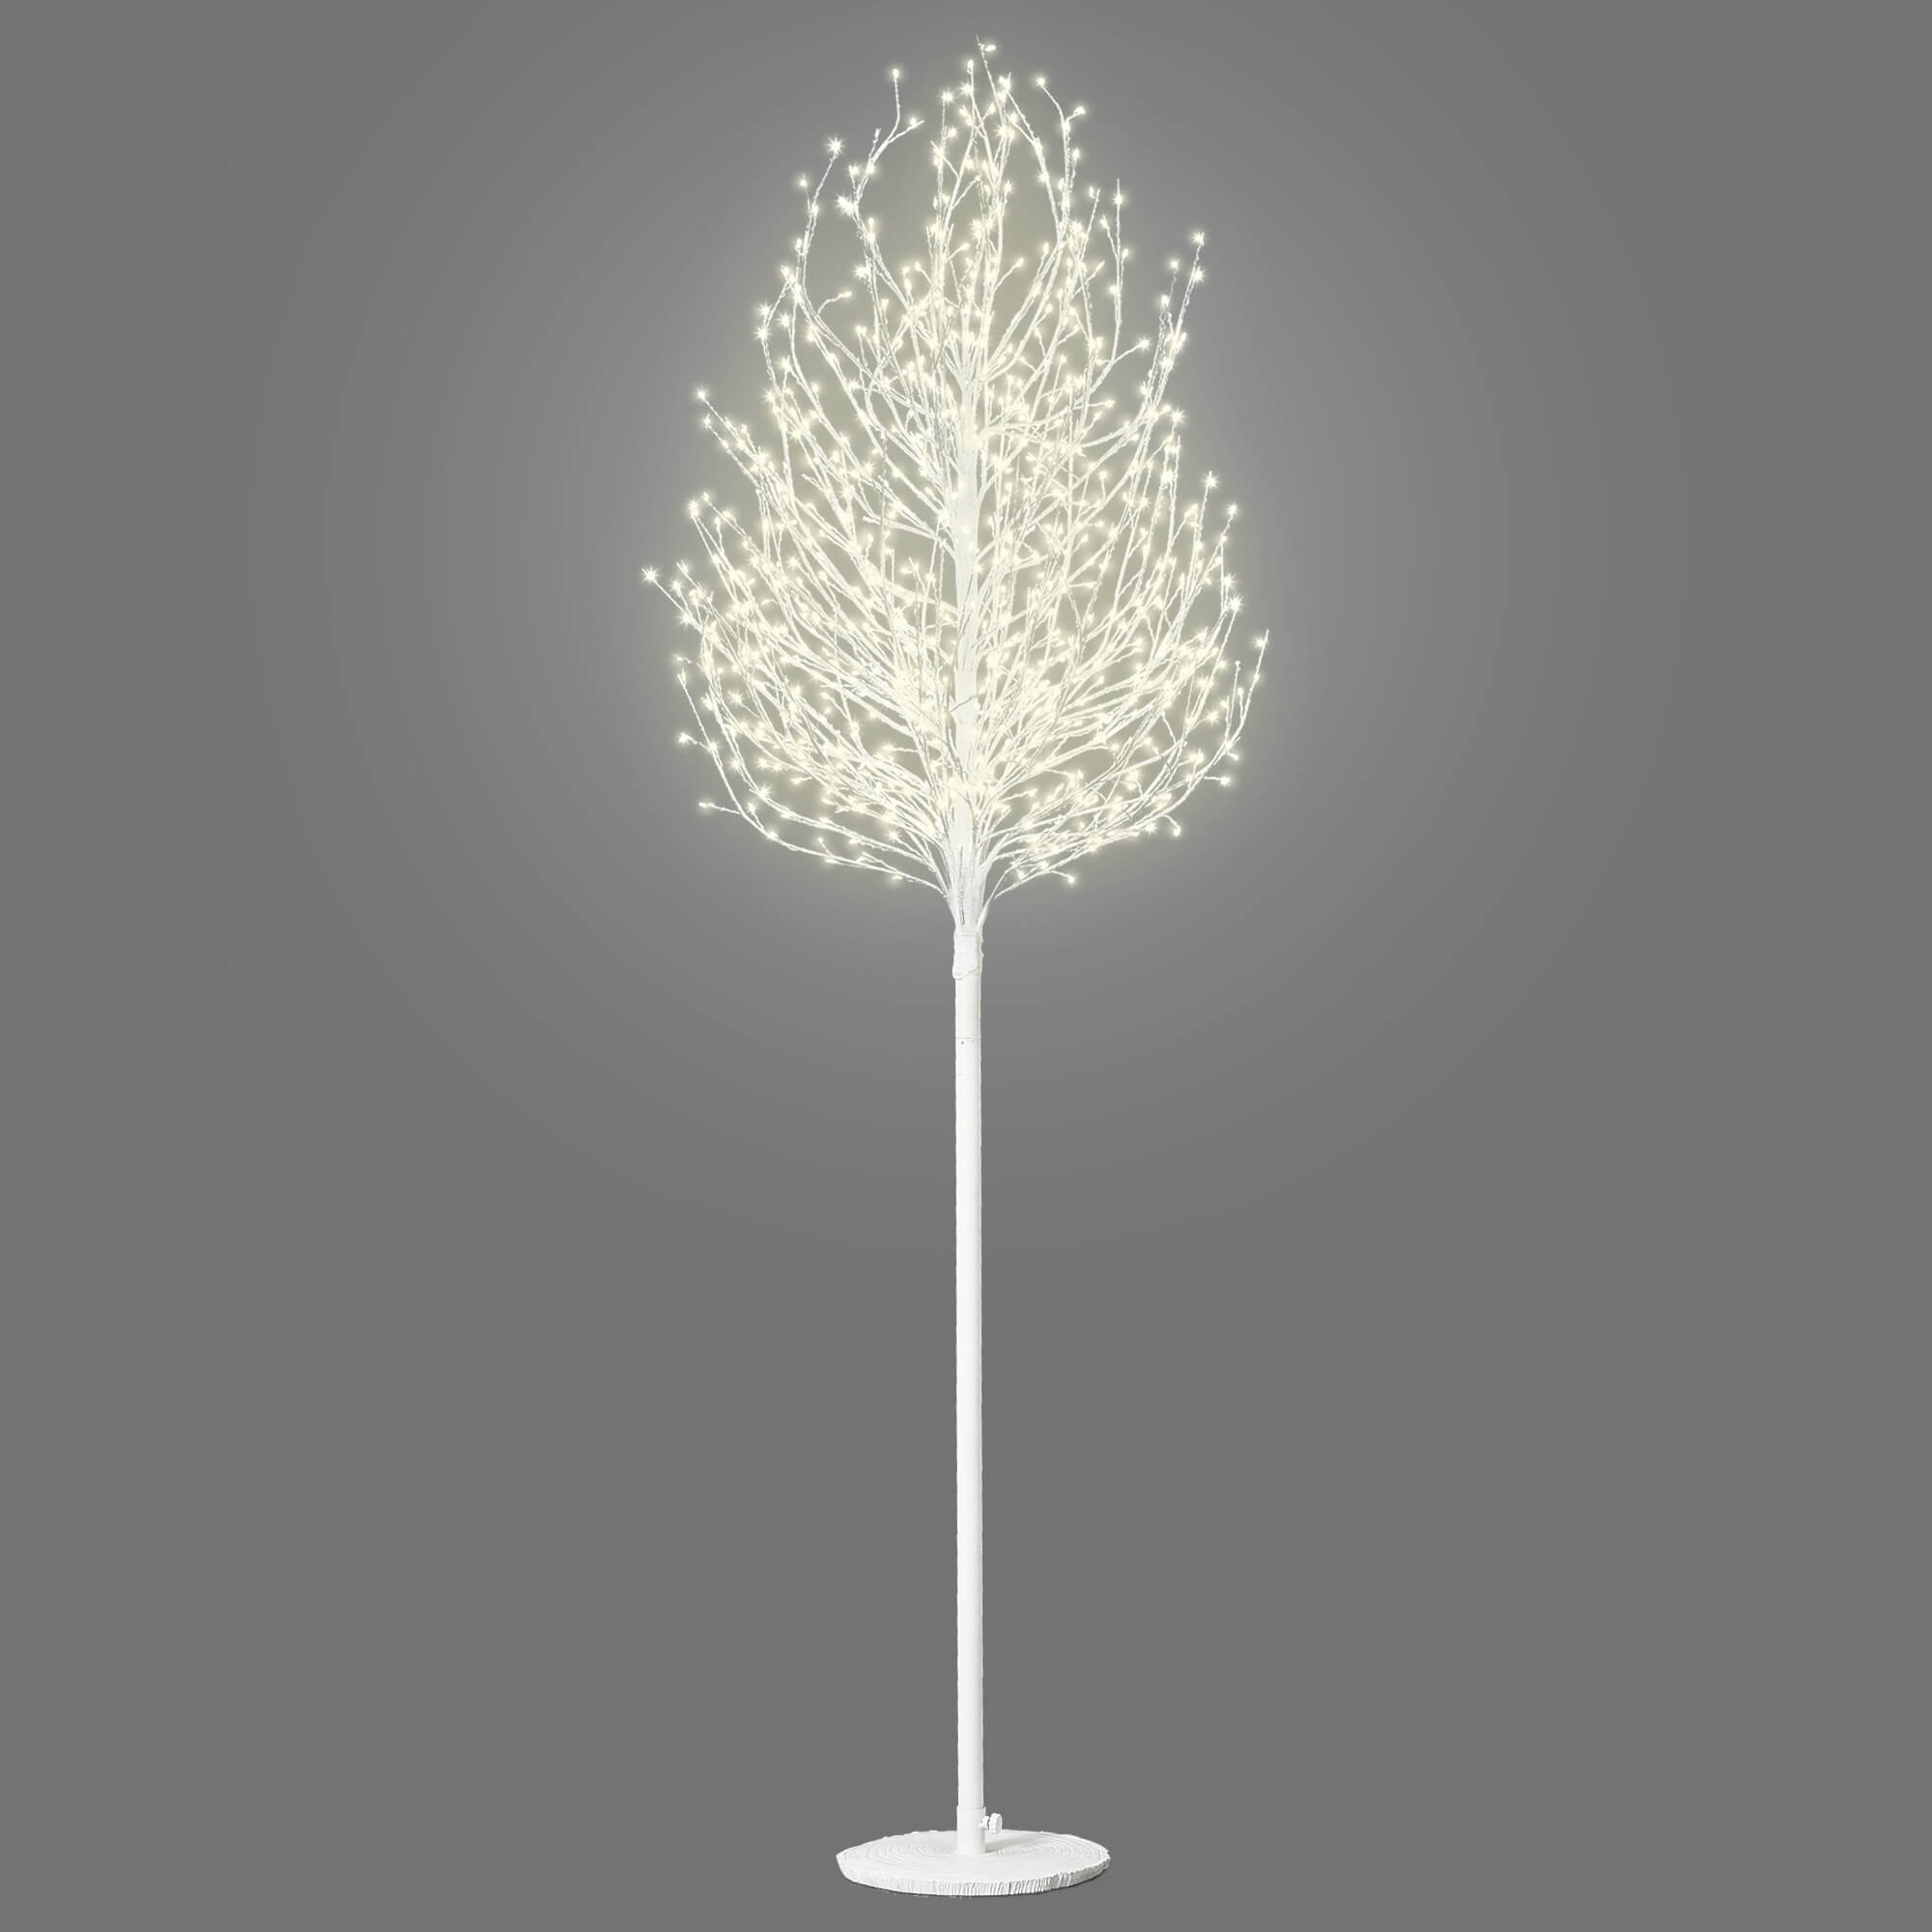 5FT Micro Dot Birch Pre-Lit Christmas Tree with 580 LED Warm White Lights - White